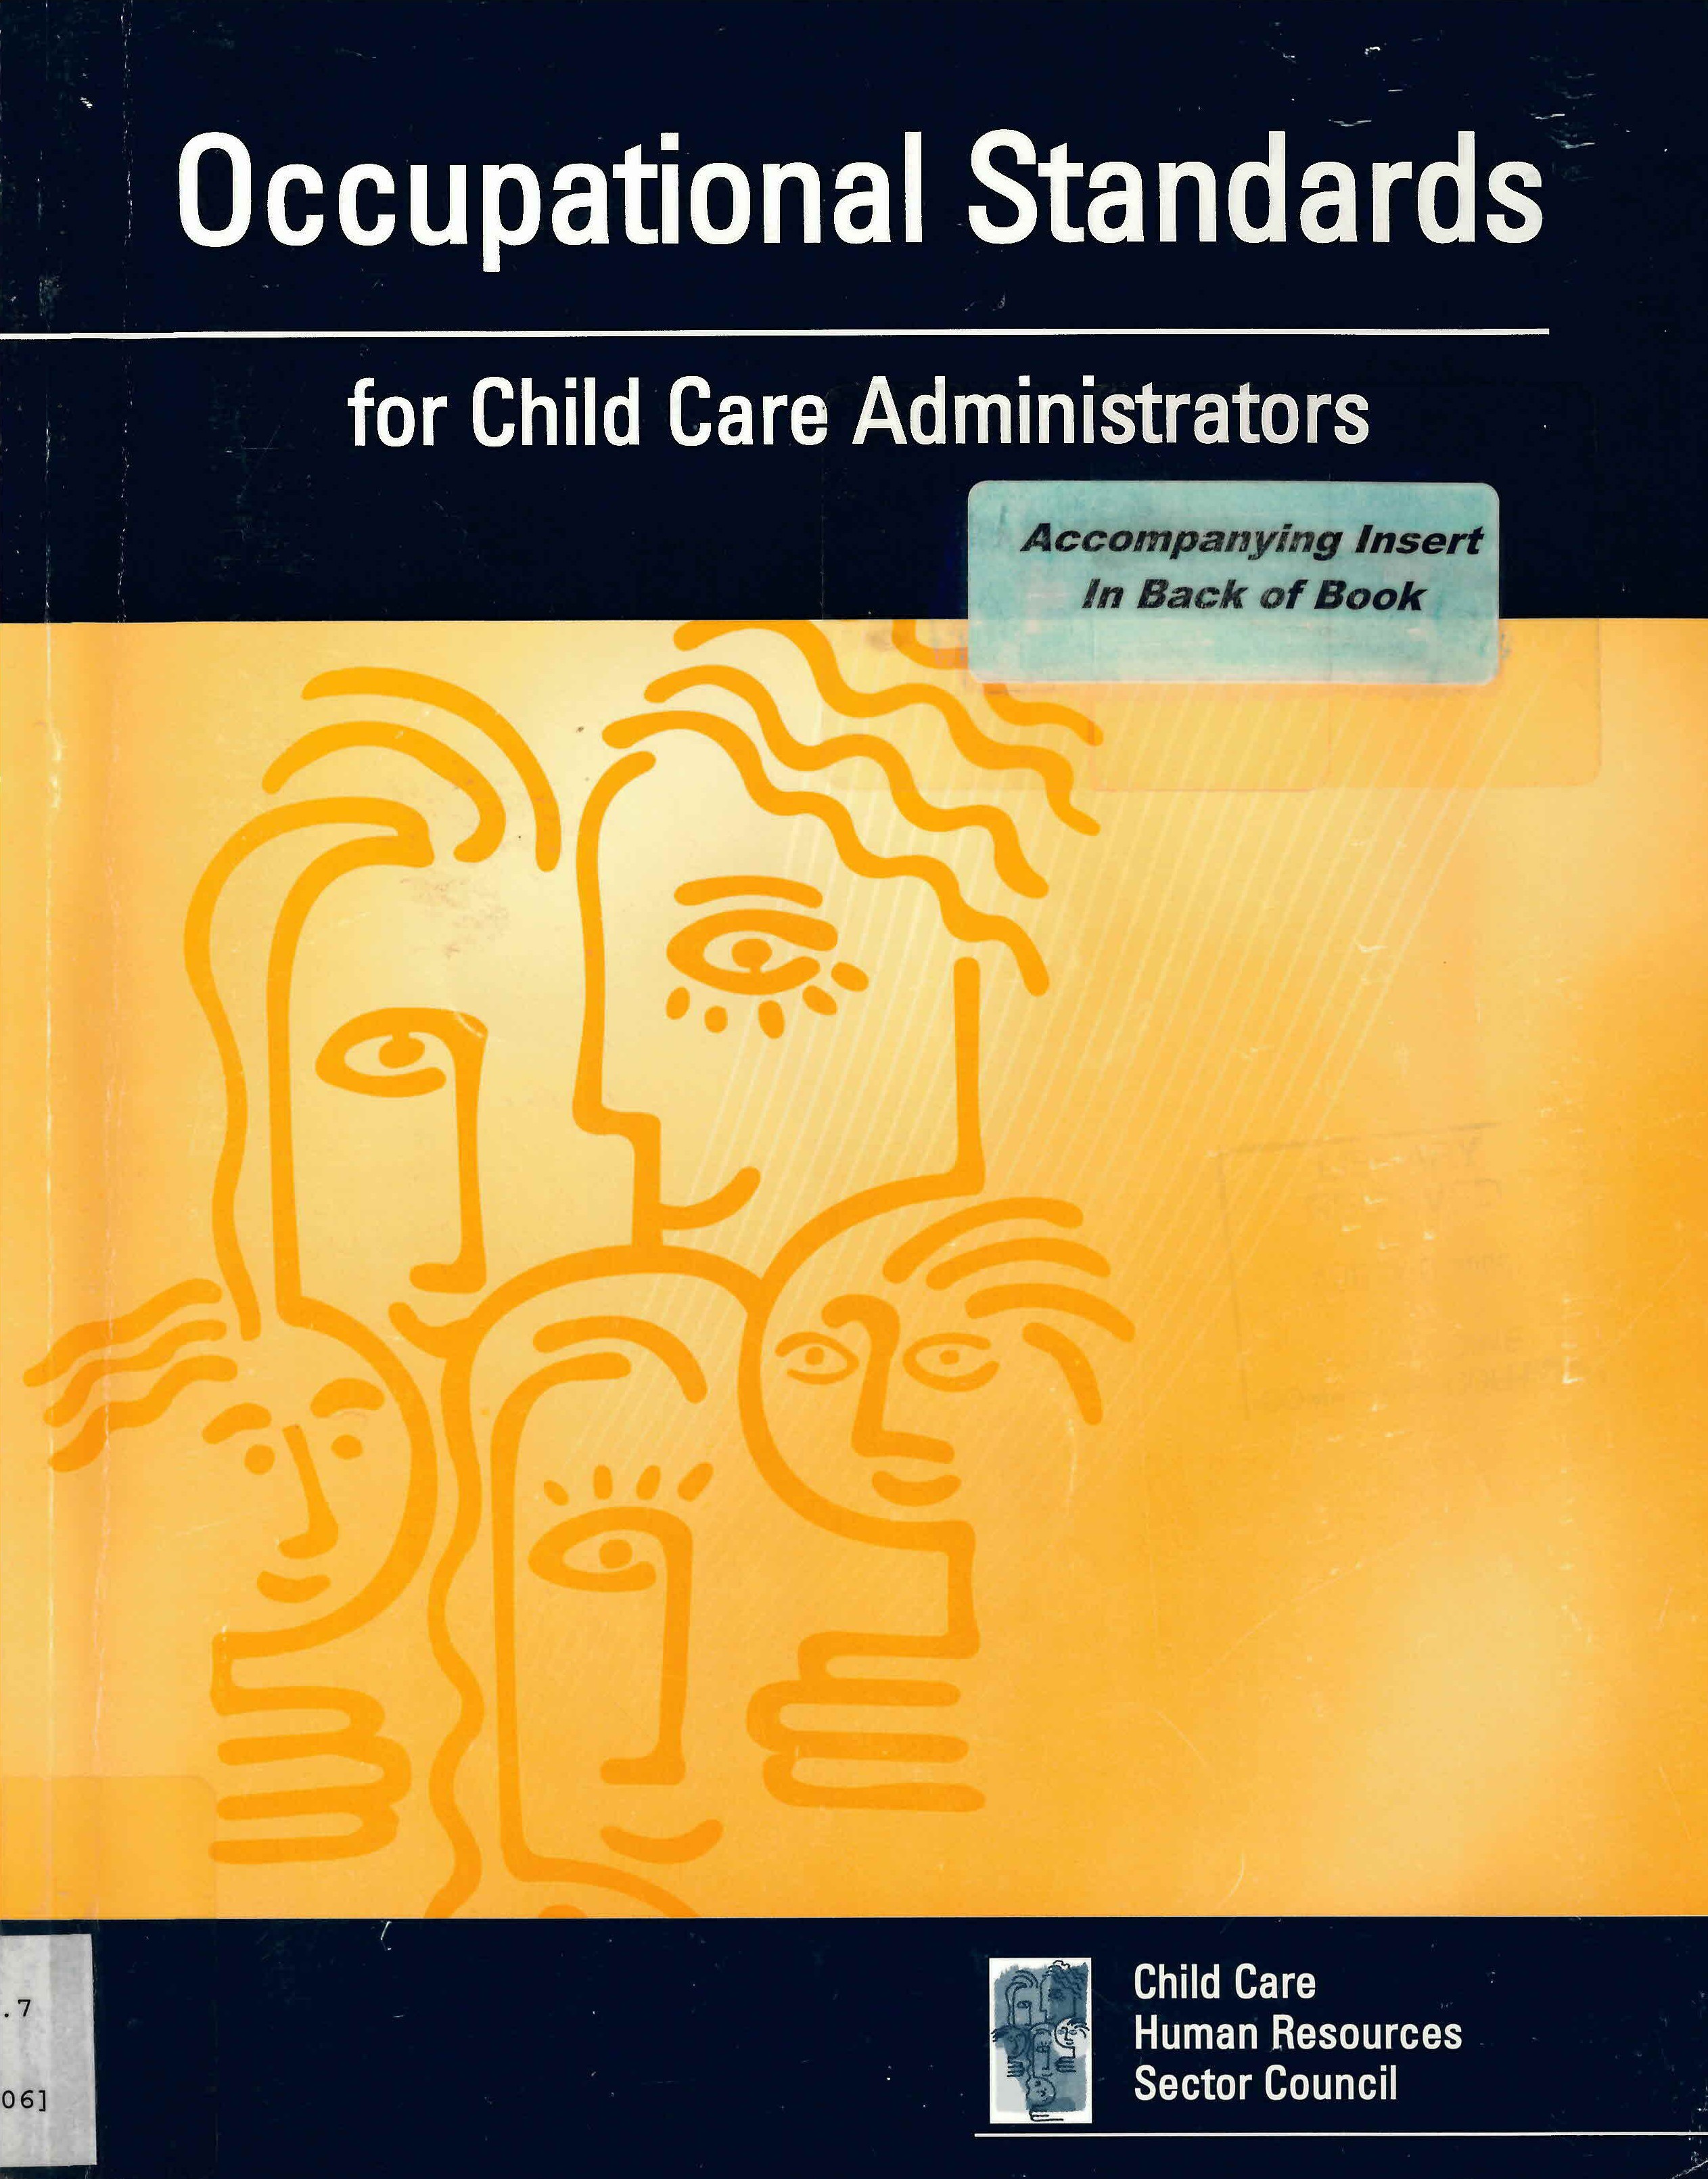 Occupational standards for child care administrators